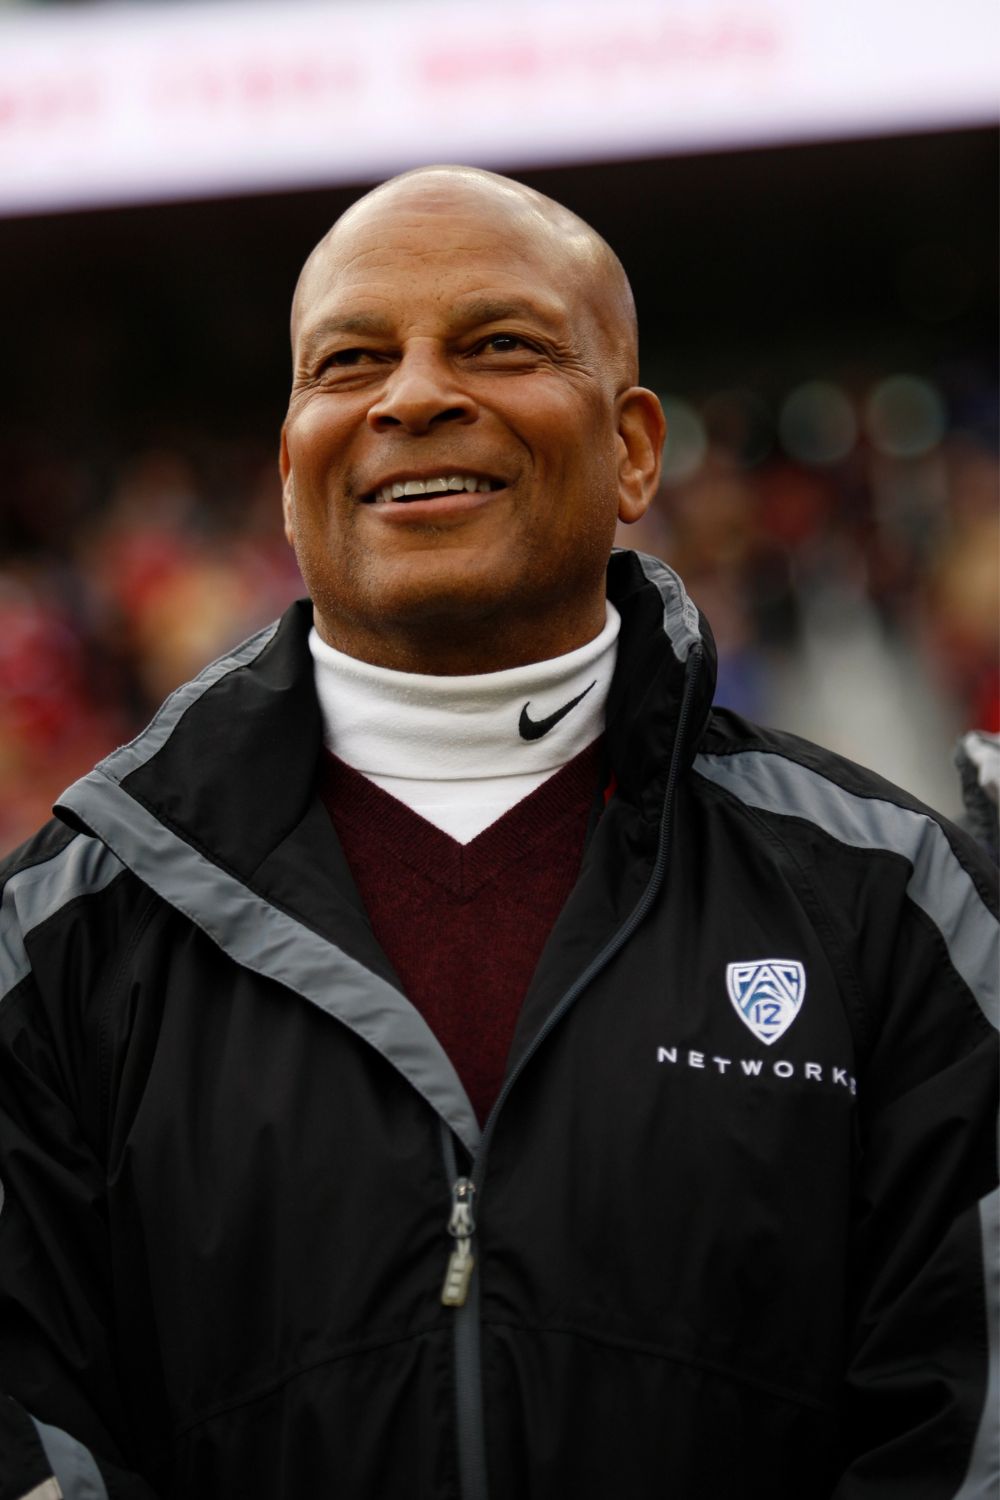 Ronnie Lott (Source: Andscape)